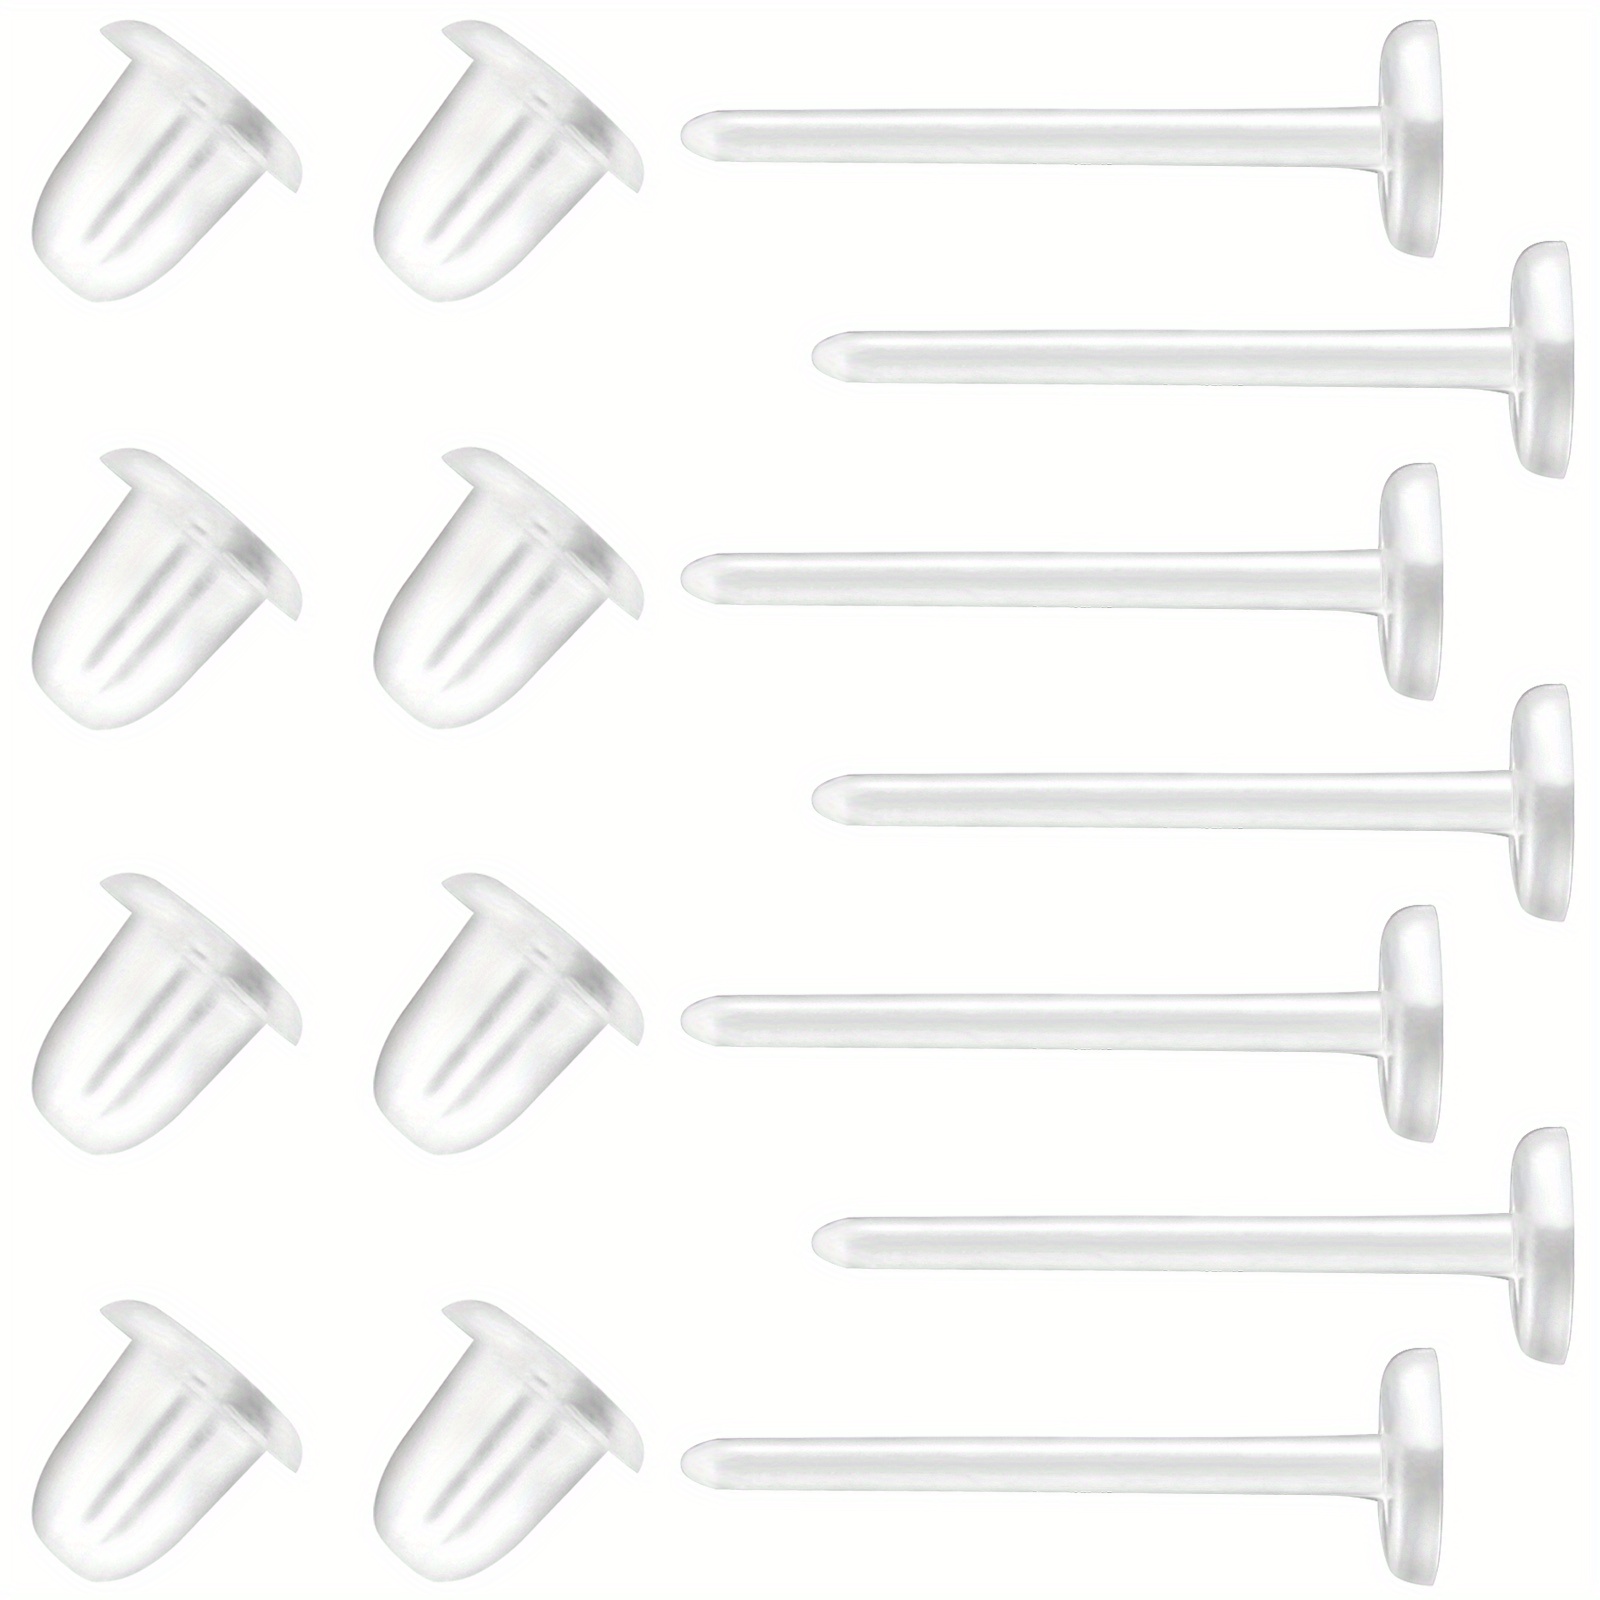 Clear Plastic Earrings -Retainer/School/Sports/Cartilage-Fast 1st class  Delivery